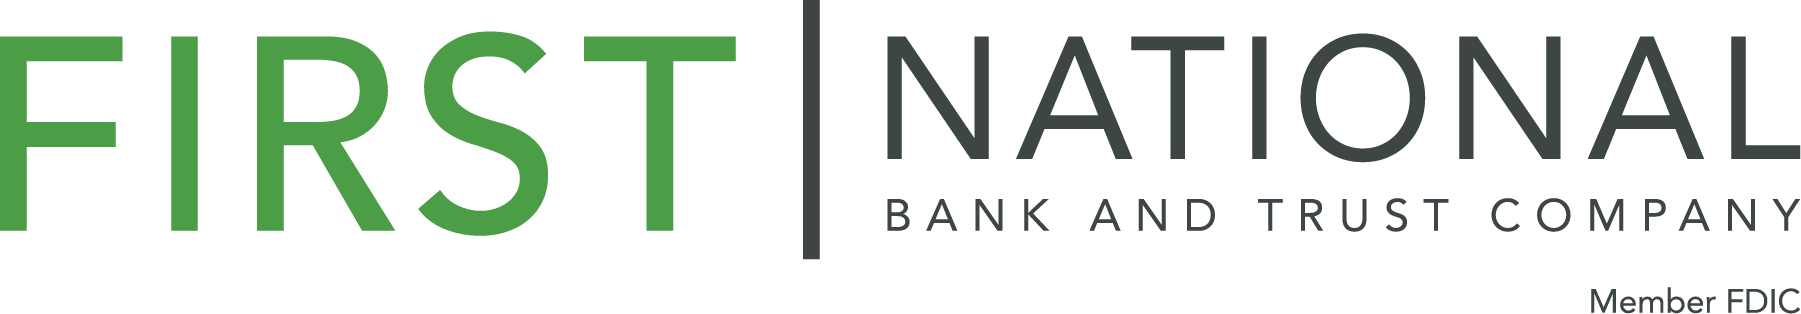 first national bank and trust company logo